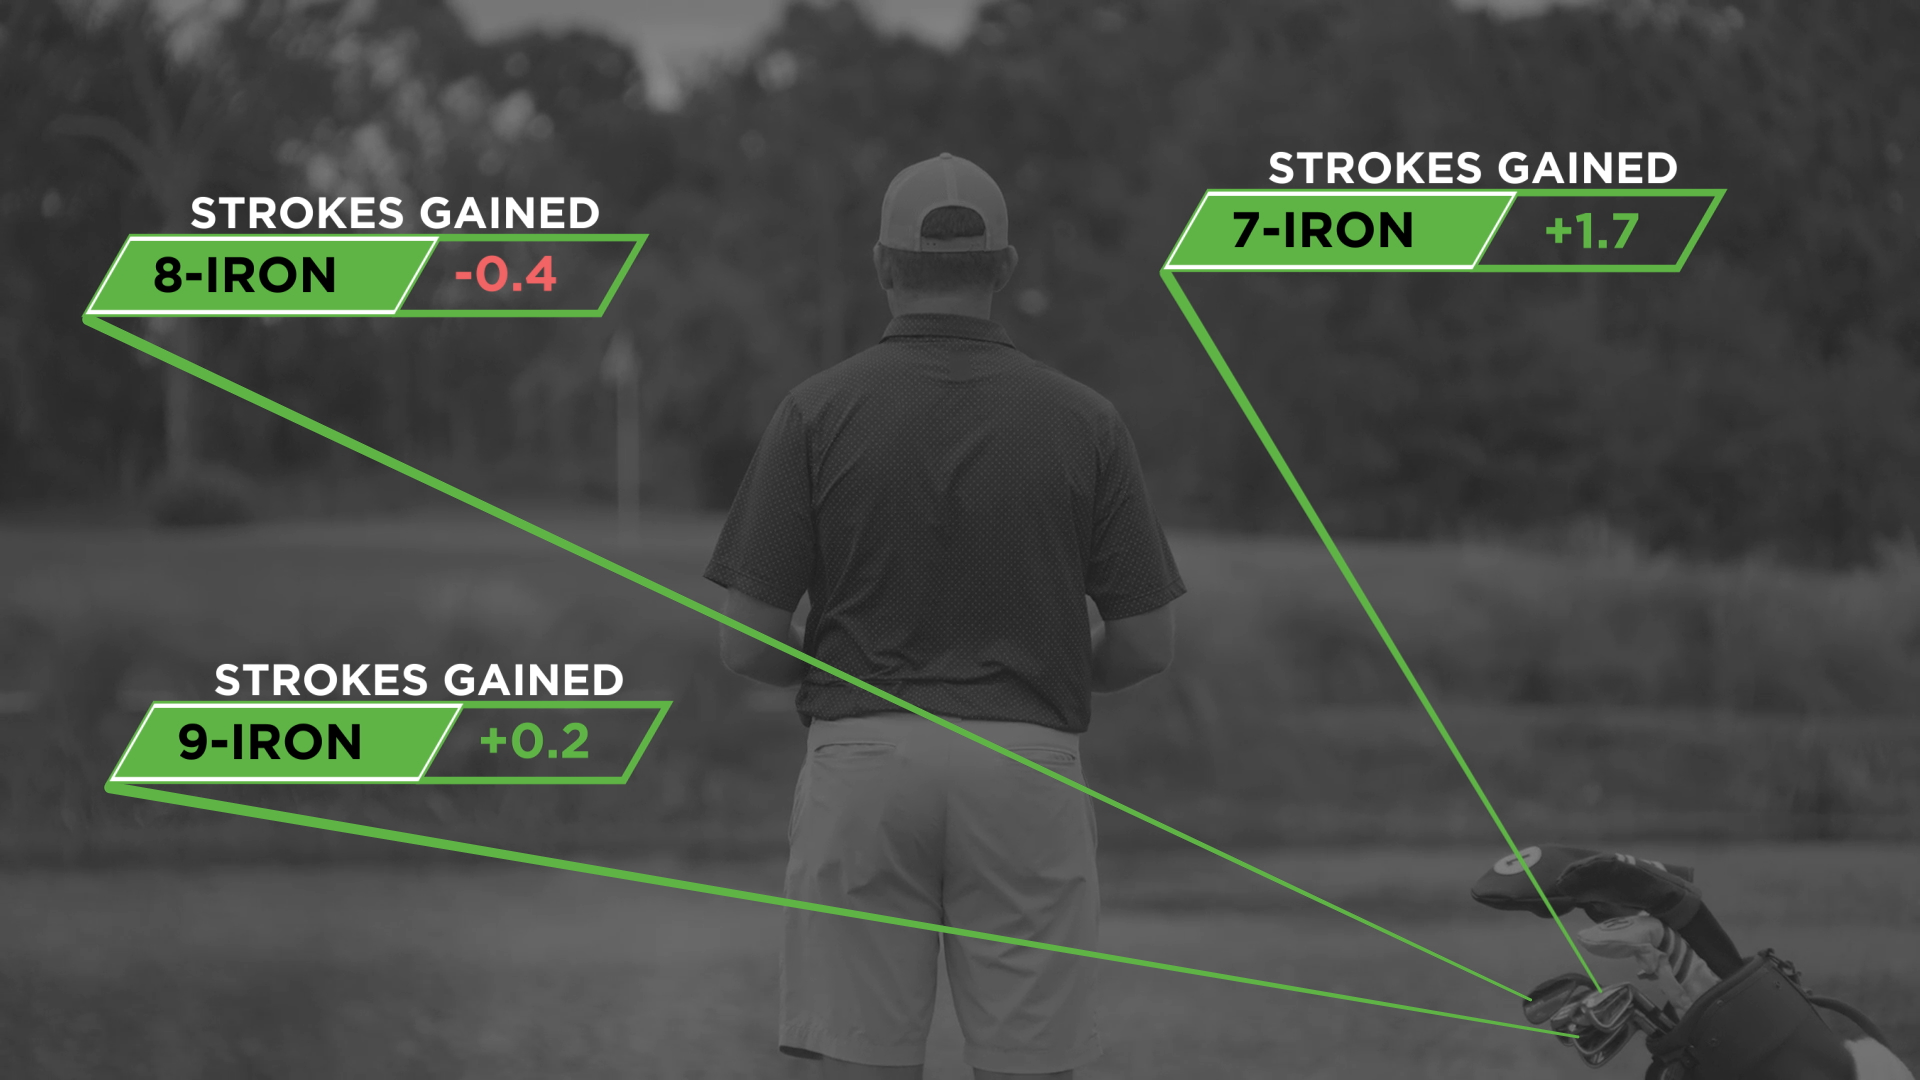 Strokes Gained By Club is Now Live For Arccos Members